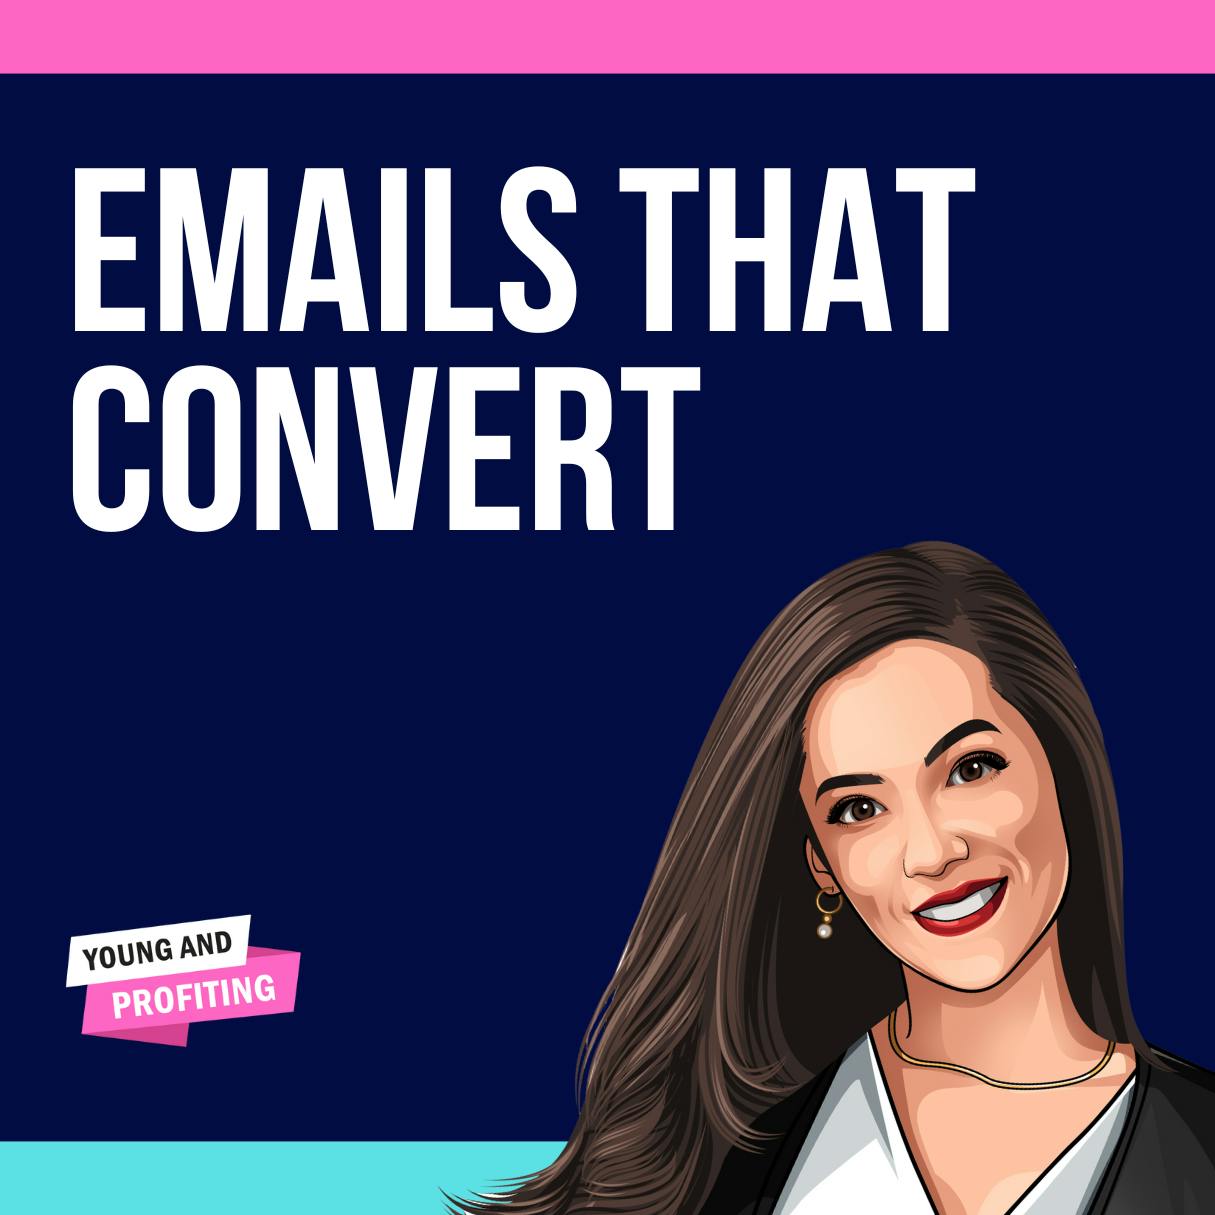 Generate Leads and Grow Your Business With These Email Marketing Secrets, Presented by Constant Contact